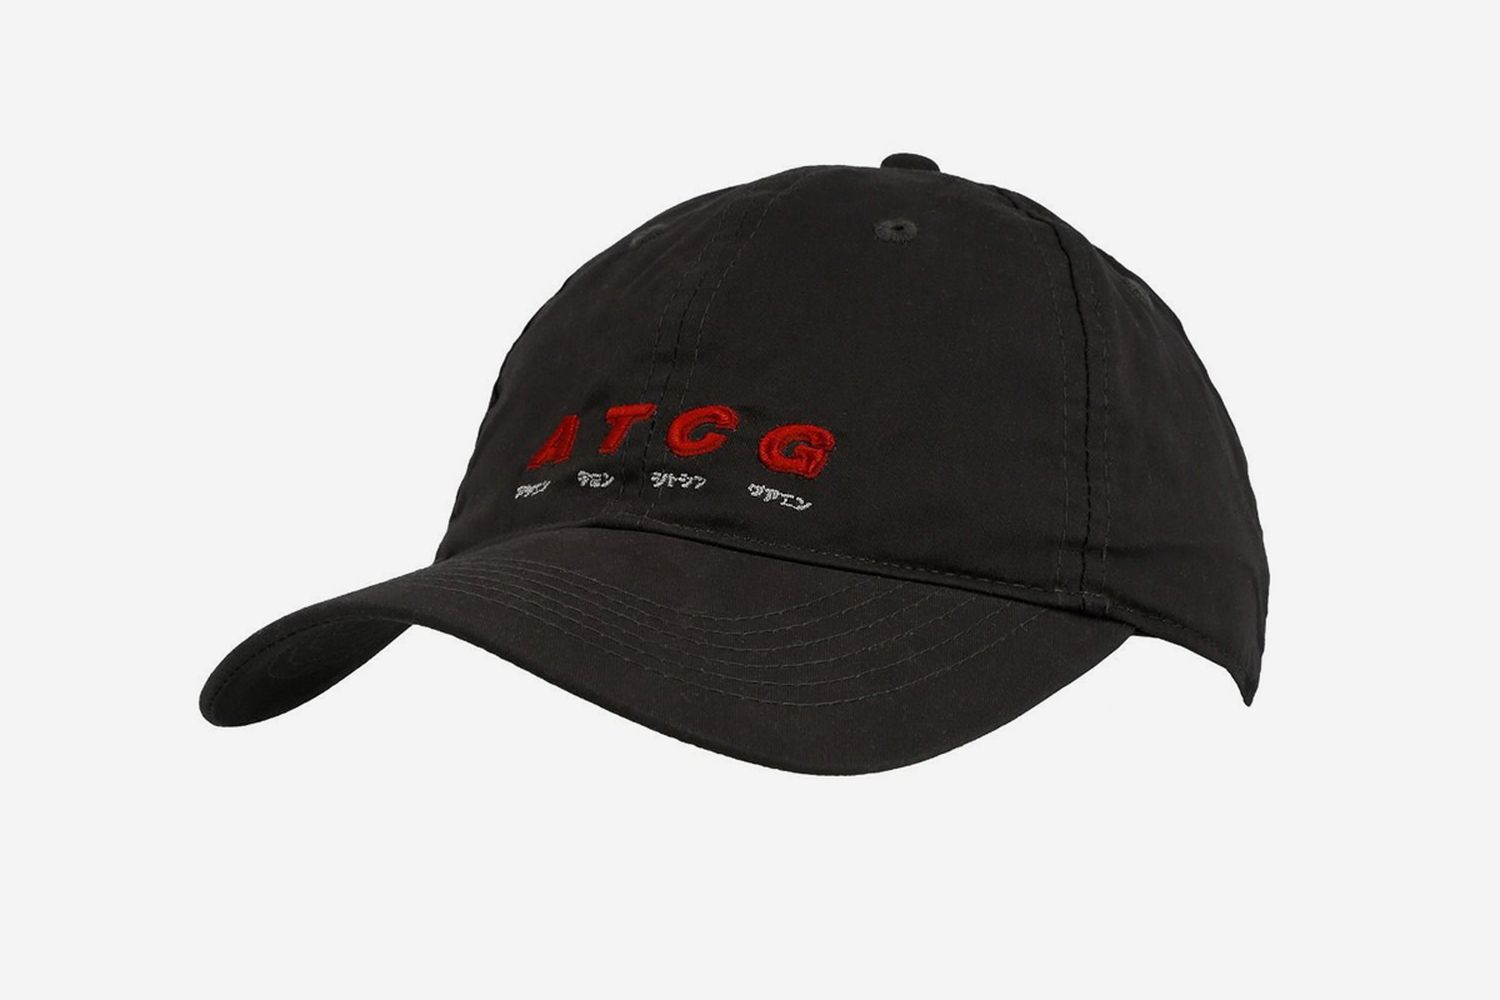 ACTG Cap "System on Carbon"